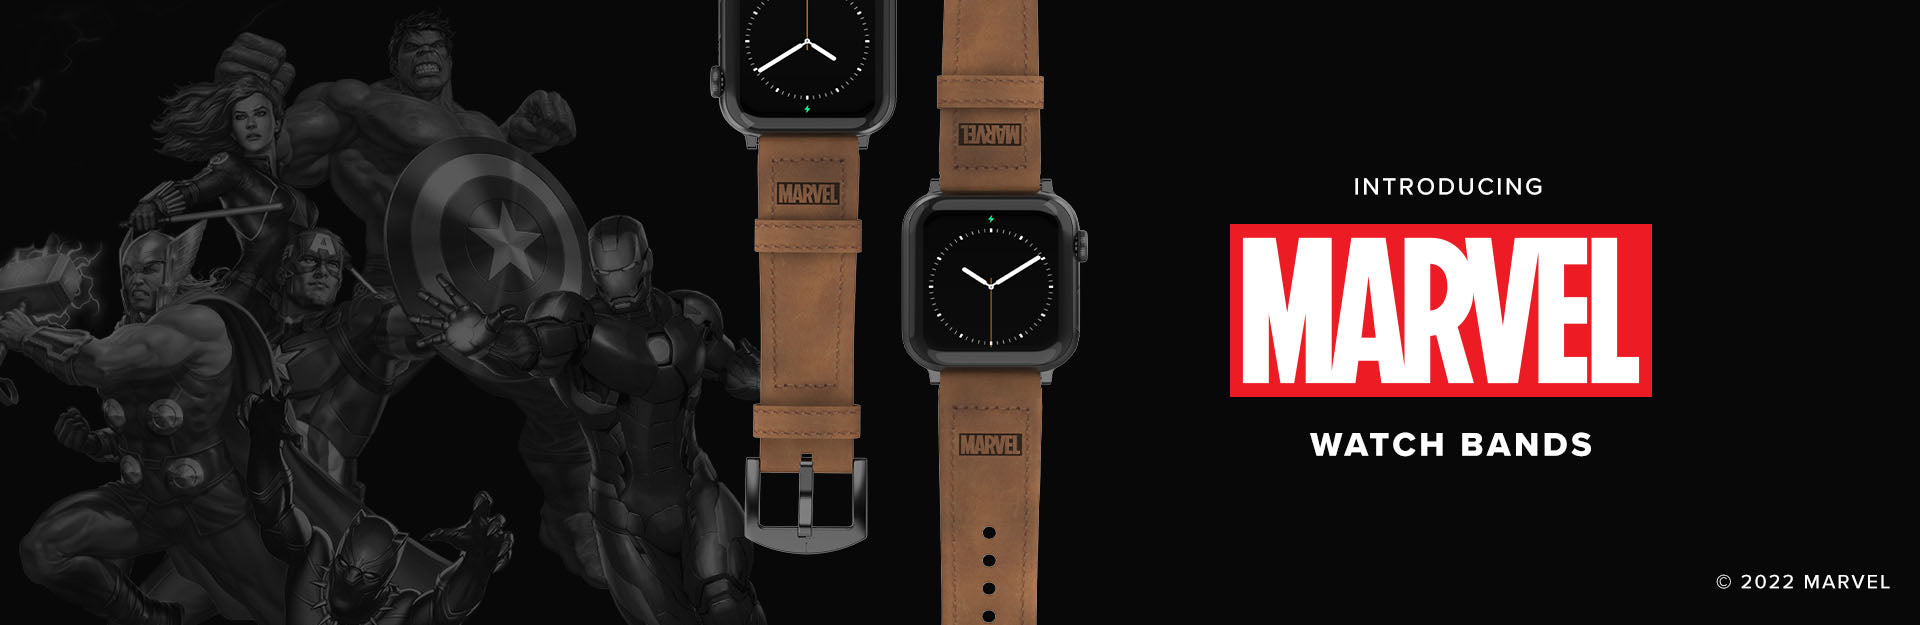 Introducing Marvel Watch Bands